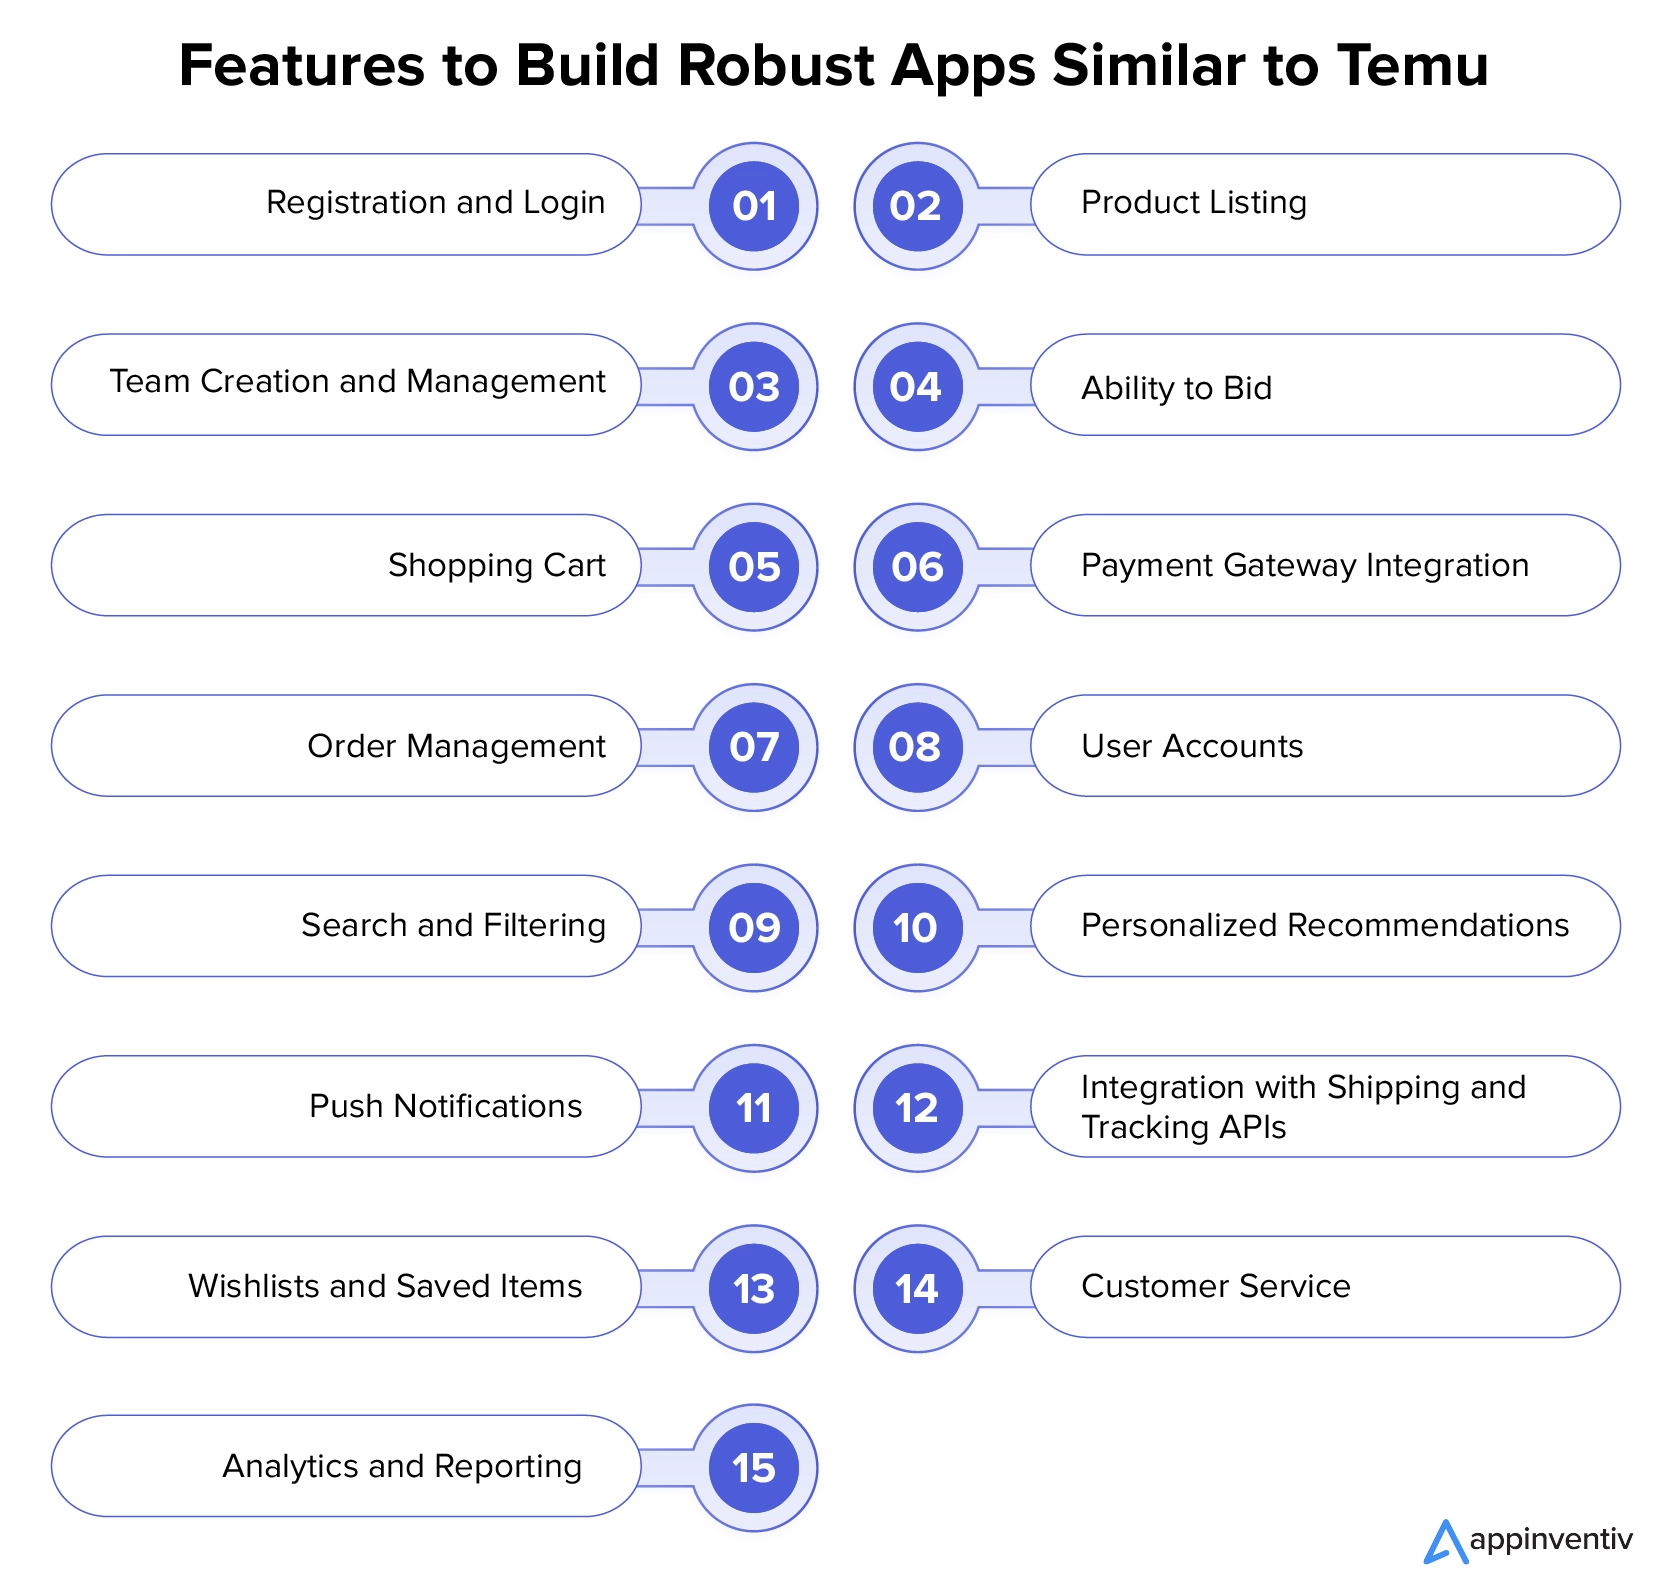 Features to build a robust app like Temu